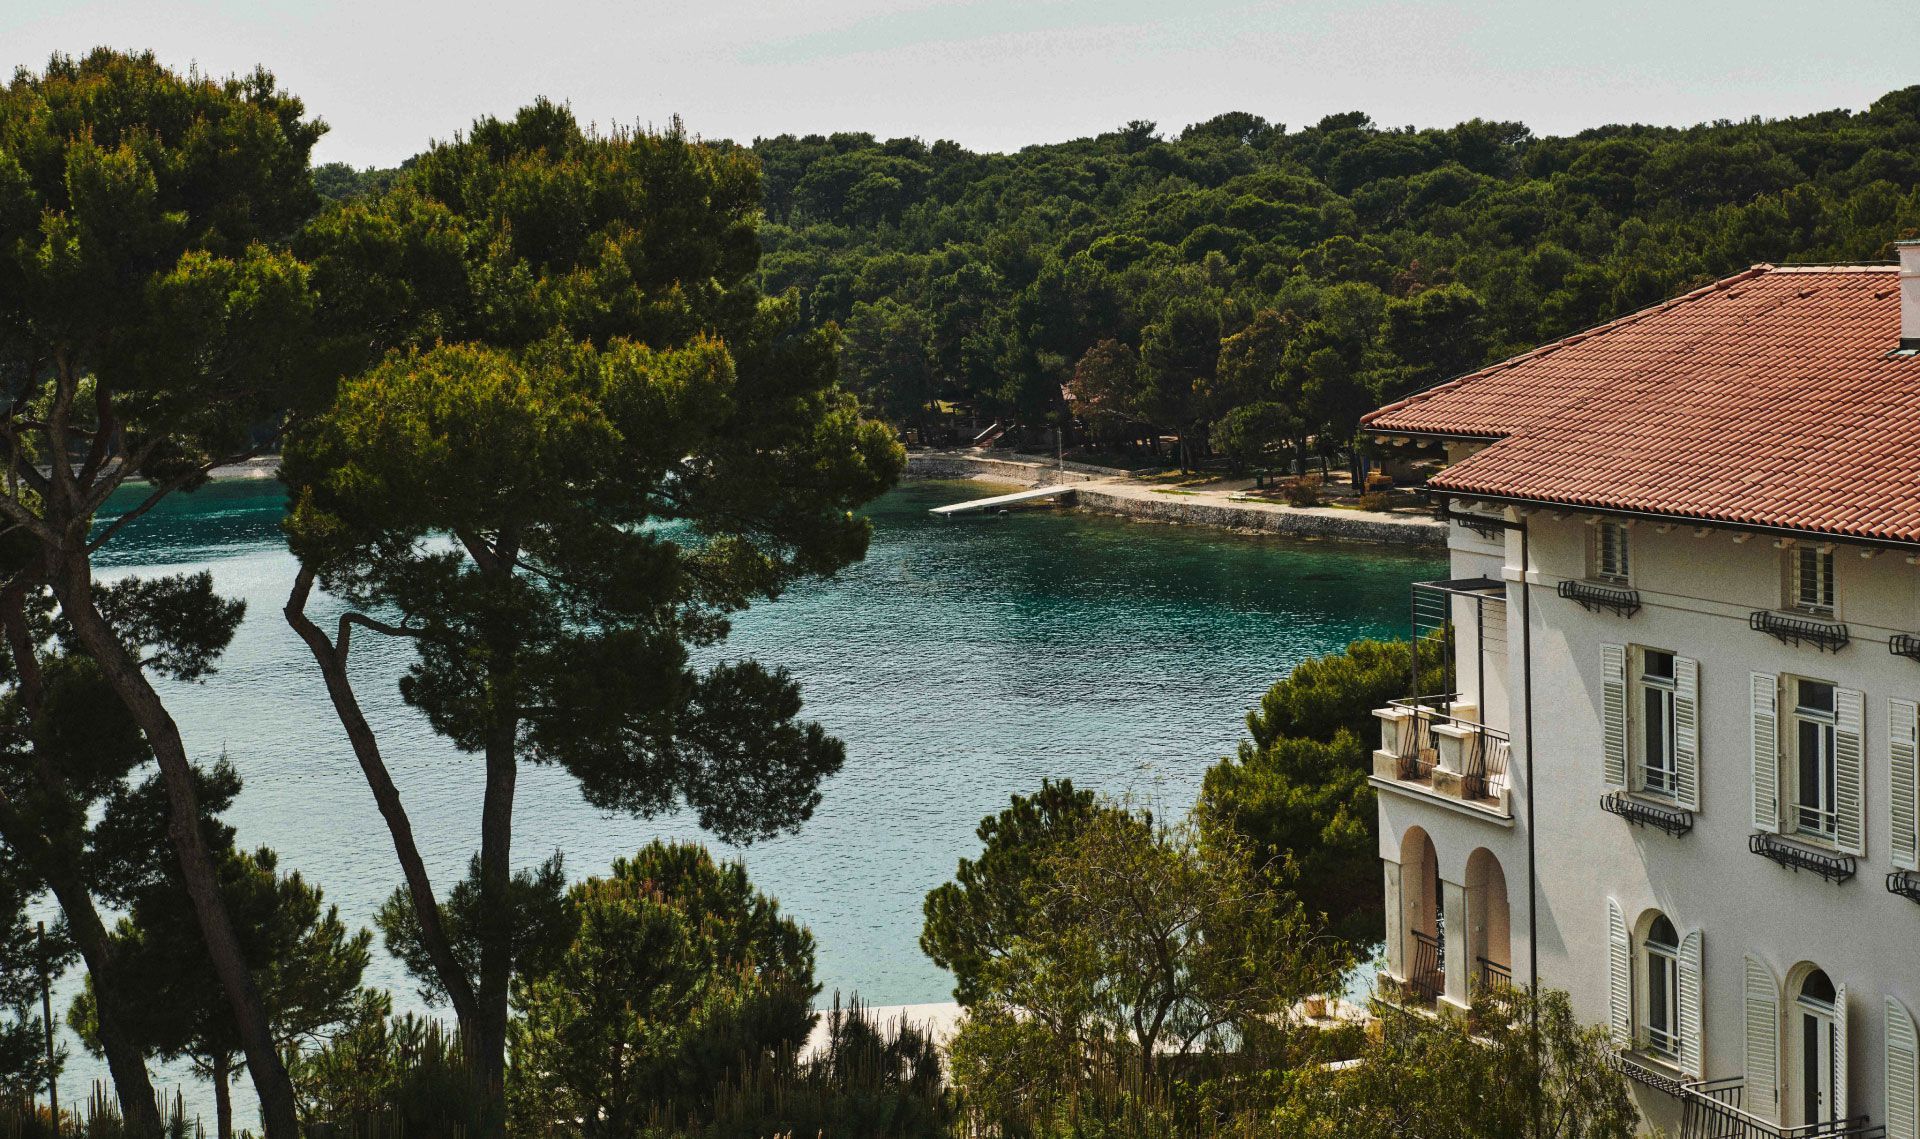 Scenic view of a seaside villa with balconies overlooking a tranquil bay surrounded by lush pine trees